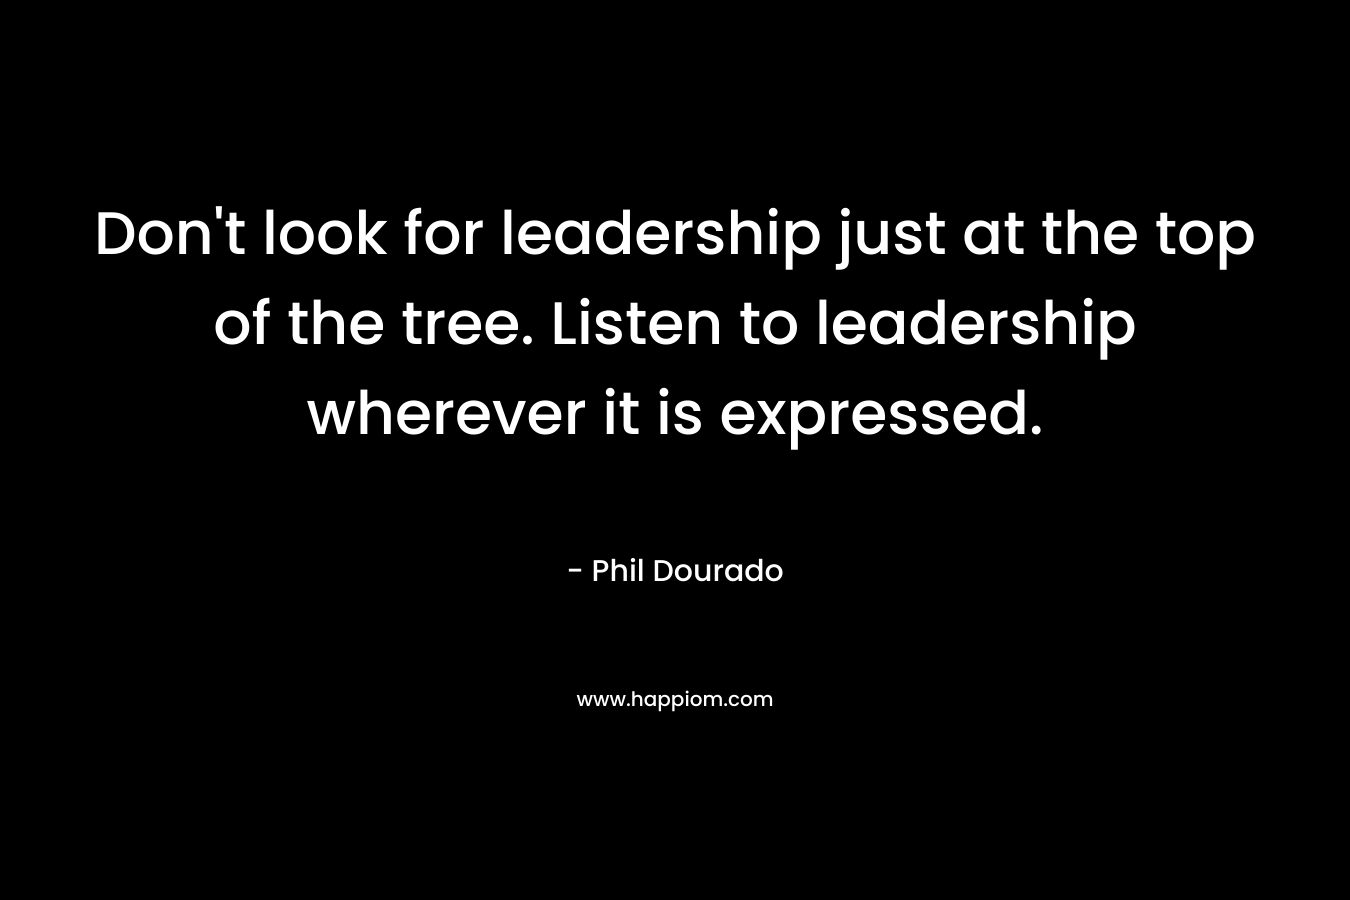 Don't look for leadership just at the top of the tree. Listen to leadership wherever it is expressed.